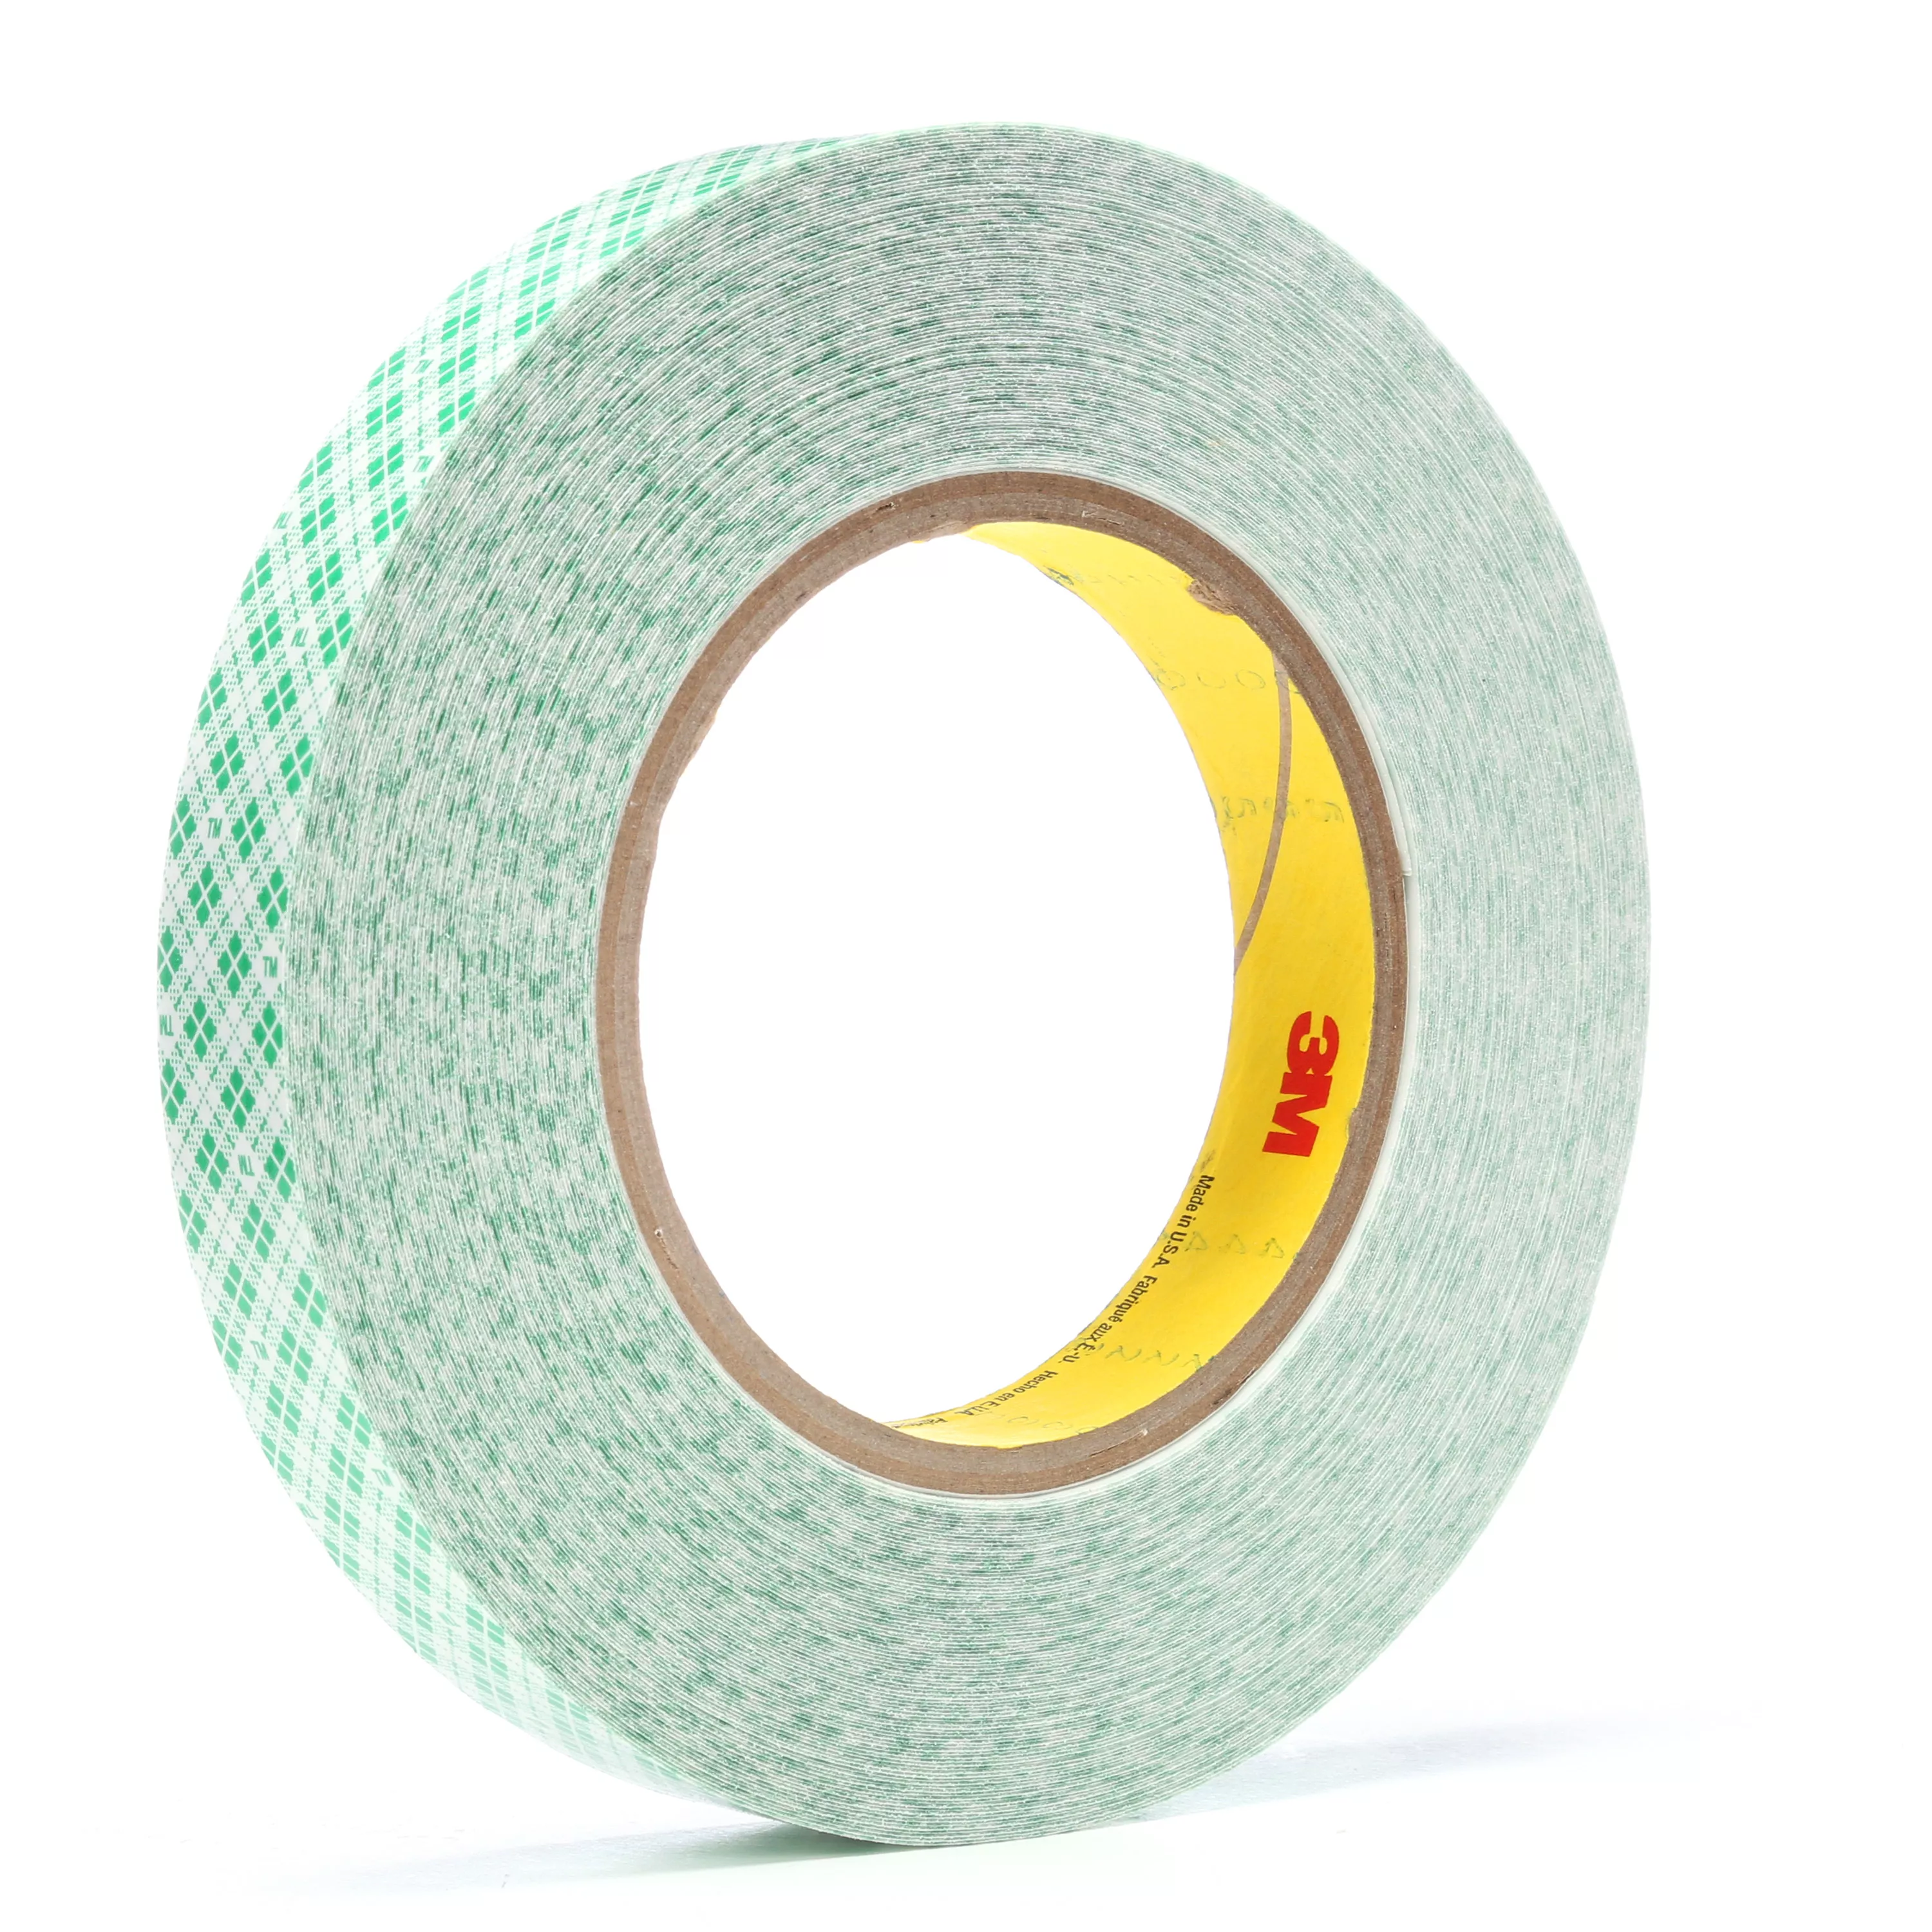 3M™ Double Coated Film Tape 9589, White, 3/4 in x 36 yd, 9 mil, 48
Roll/Case